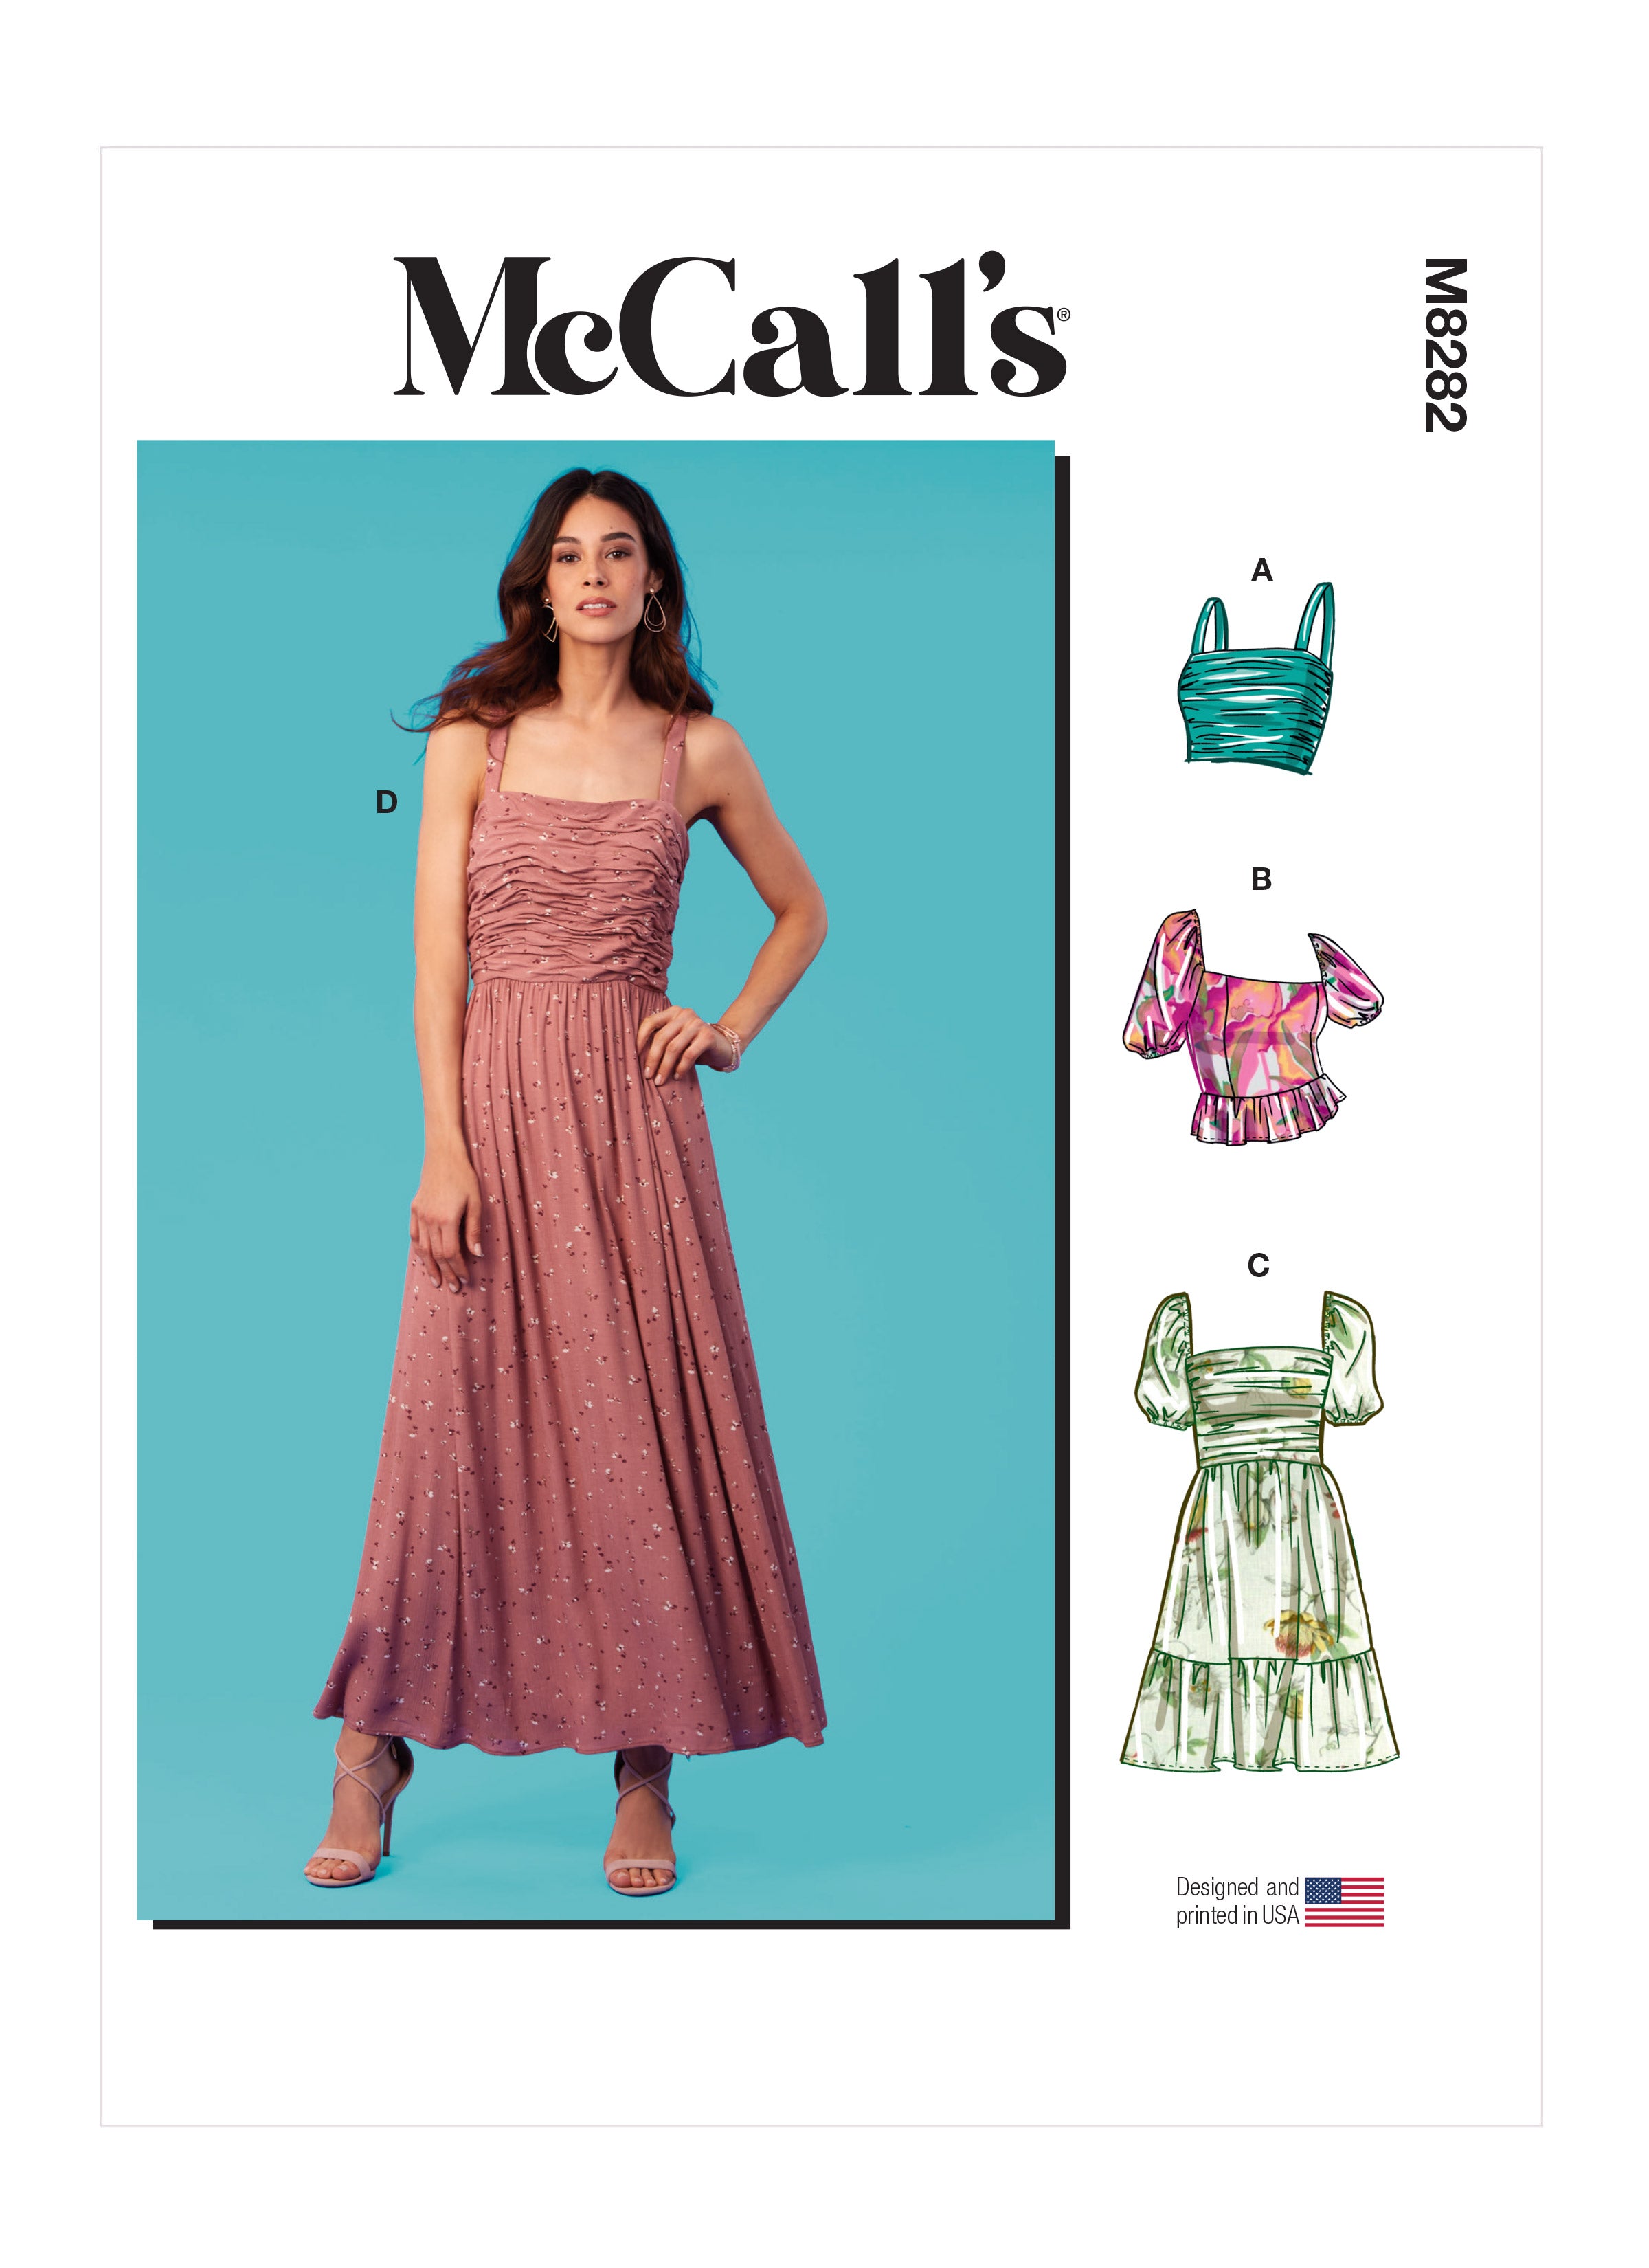 McCalls 8282 Misses' Tops and Dresses sewing pattern from Jaycotts Sewing Supplies